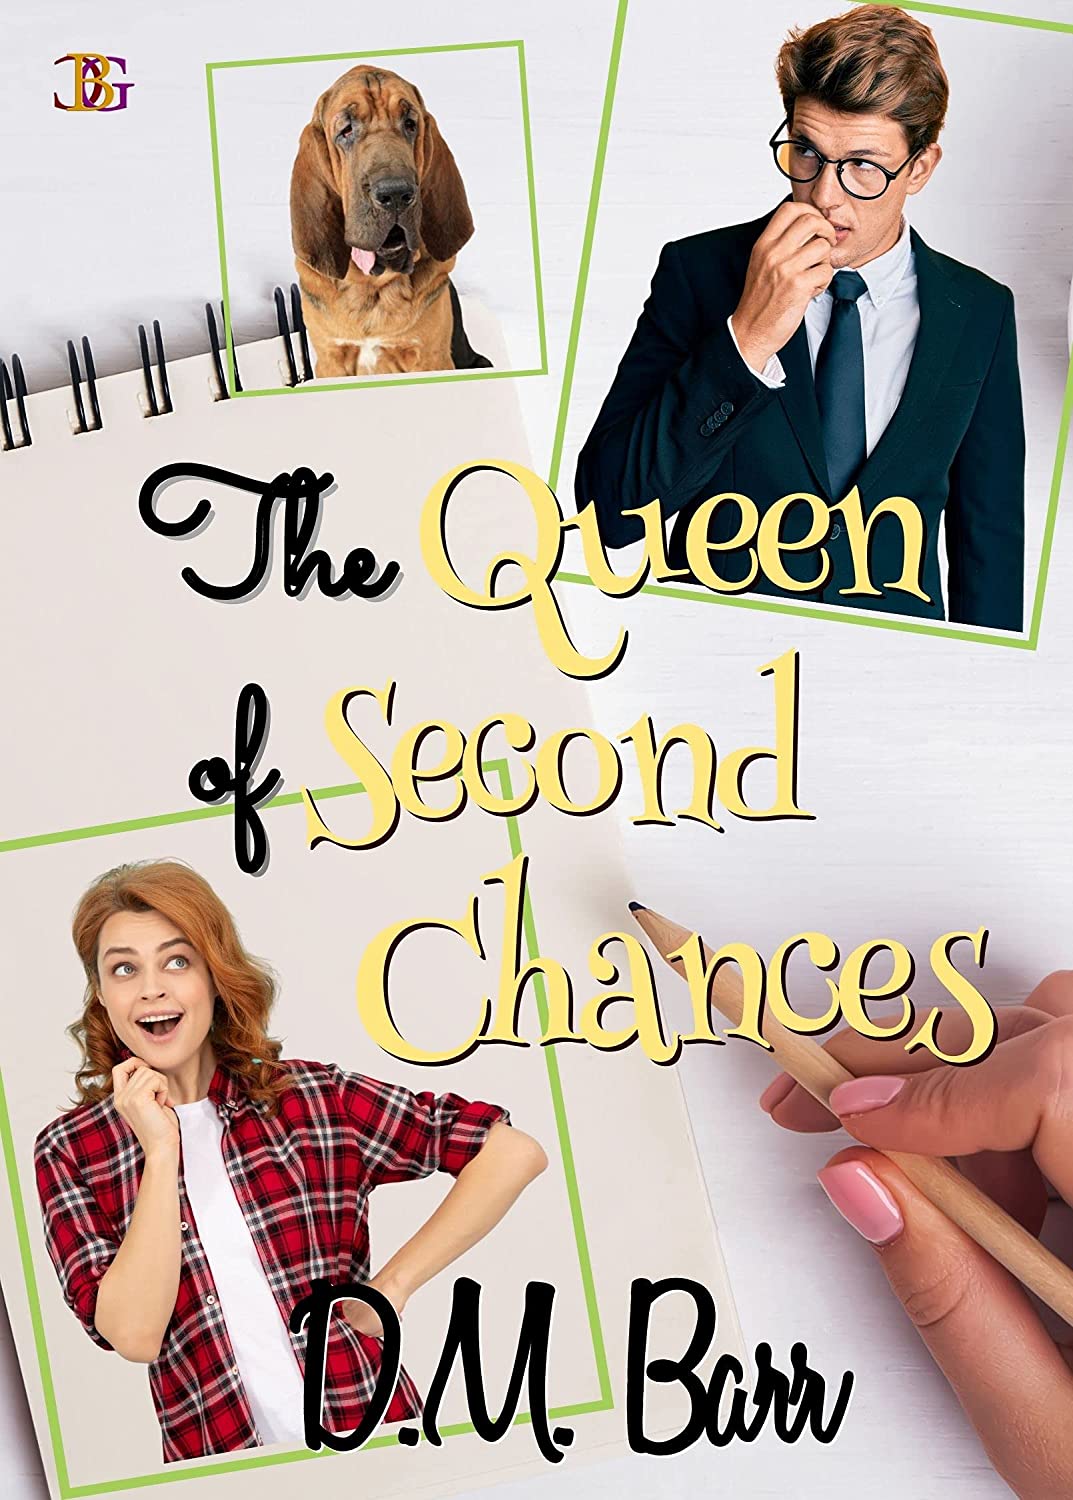 The Queen of Second Chances by D.M. Barr